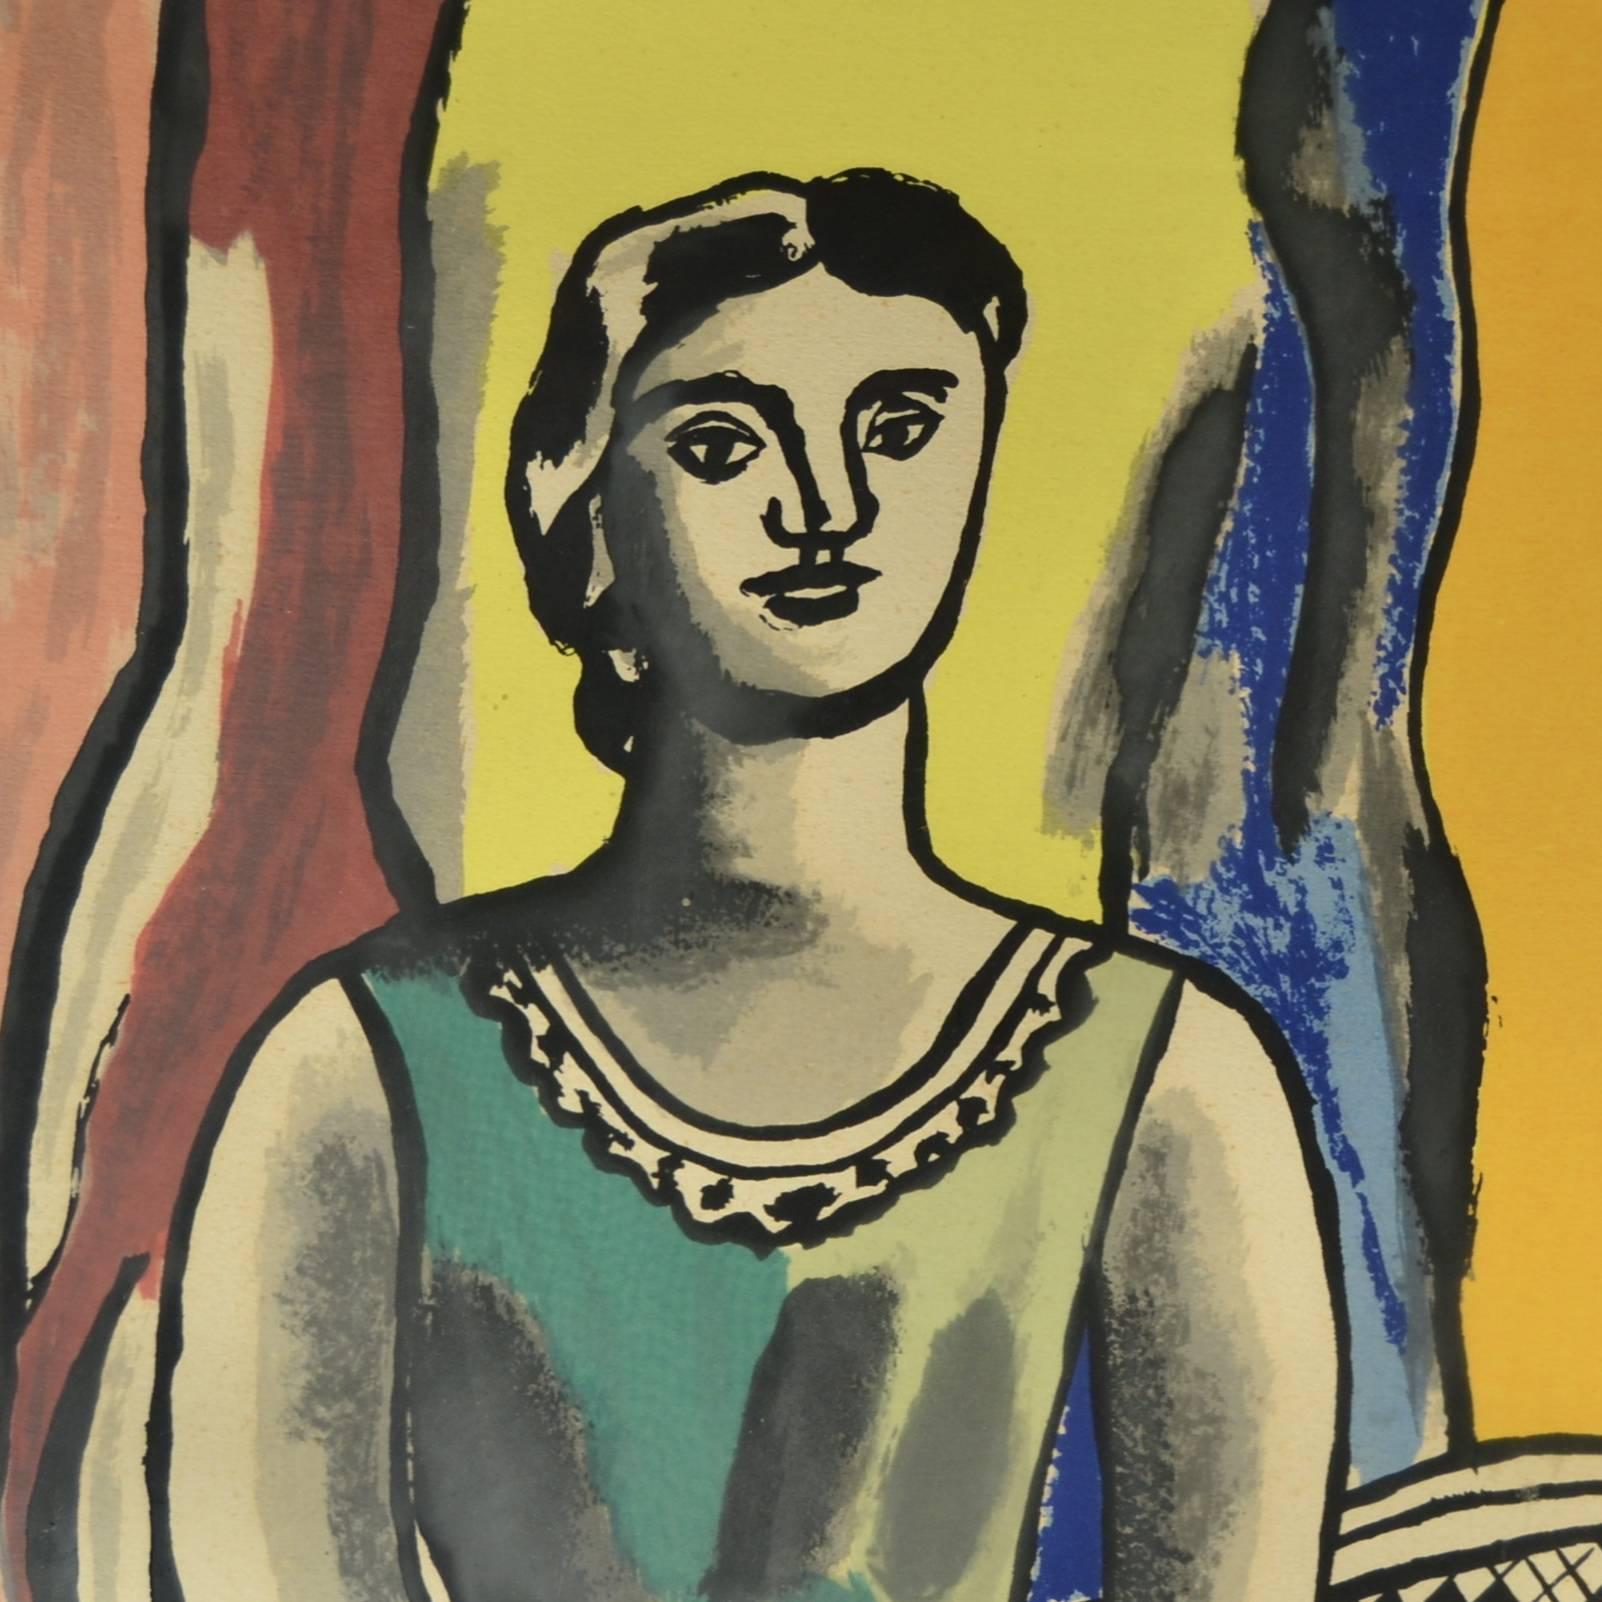 Lithograph attributed to Fernand Léger (1881-1955), woman with an armchair, 1953. Numbered 373/600.
Dimensions: 53 x 42 cm (49 x 61 cm).